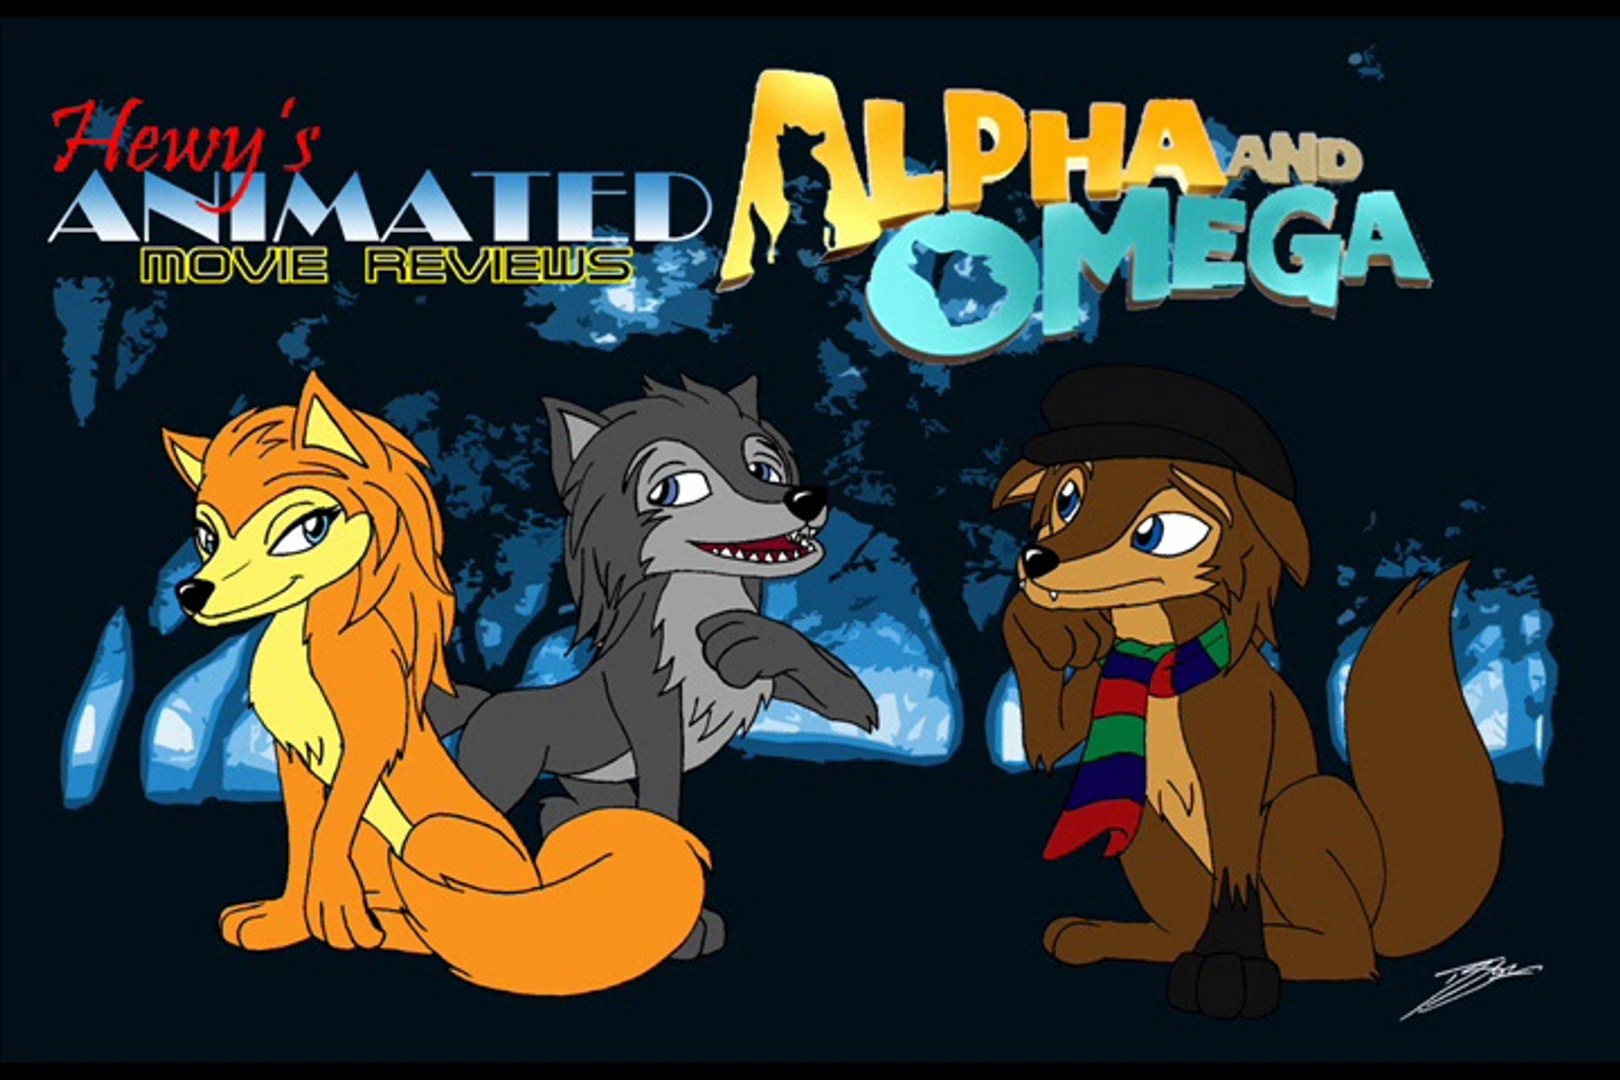 Hewy's Animated Movie Reviews #29 Alpha and Omega - video Dailymotion